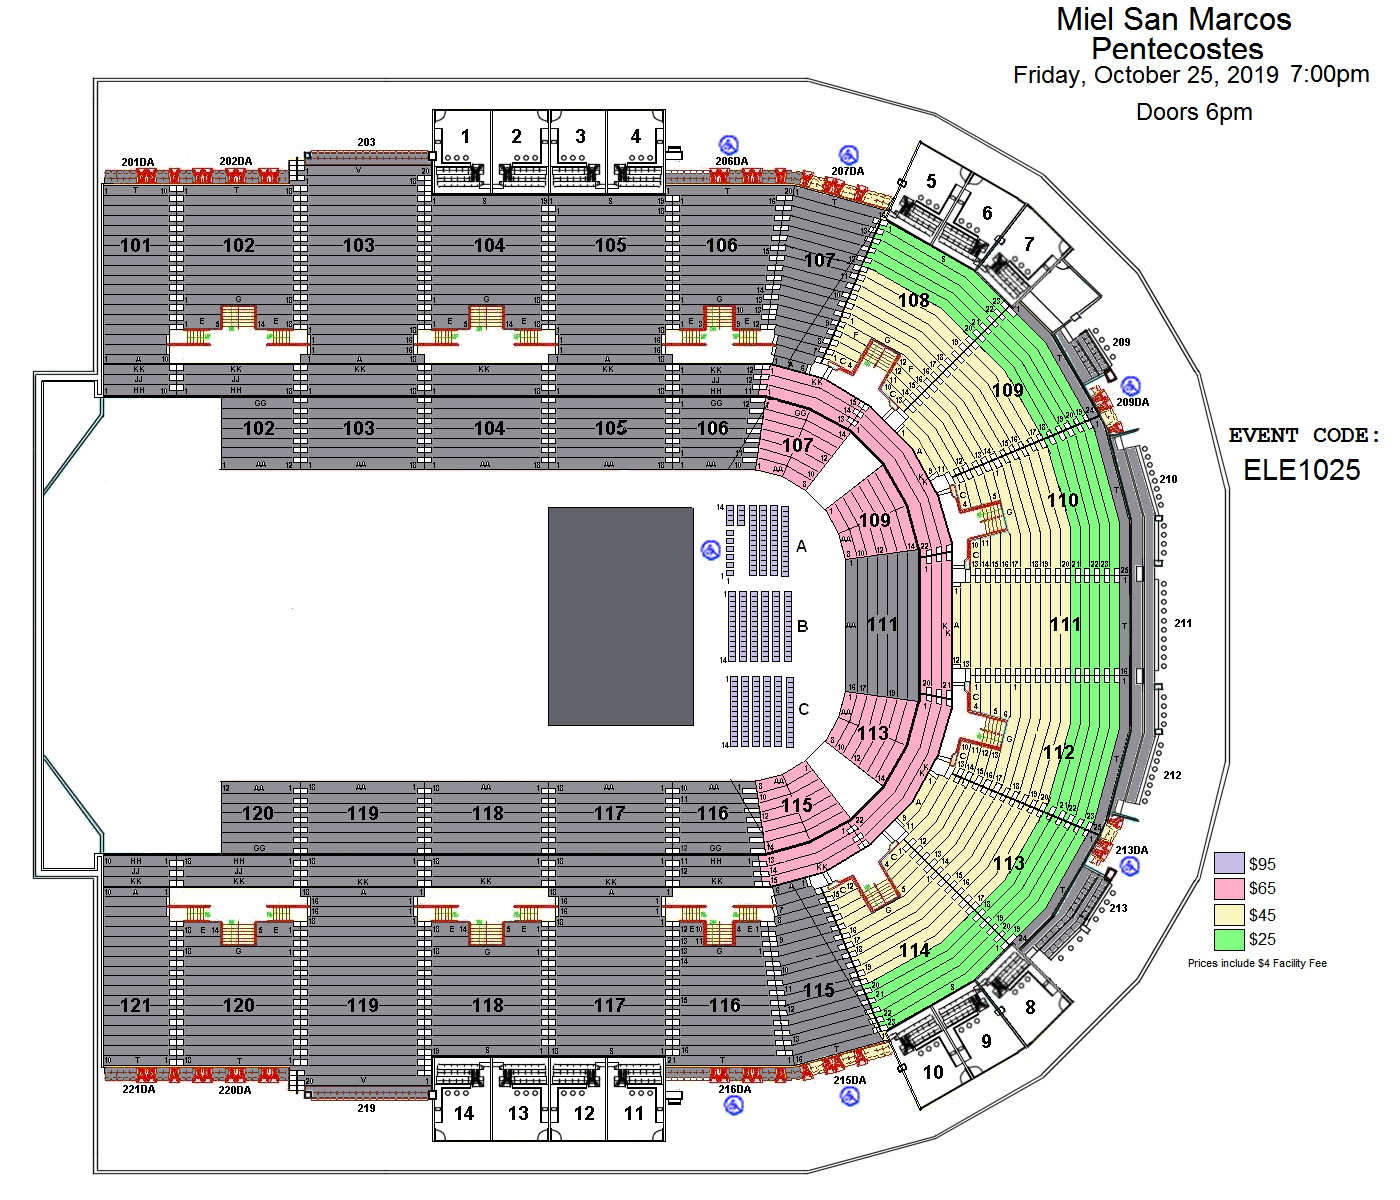 Infinite Energy Arena Seating Chart With Rows